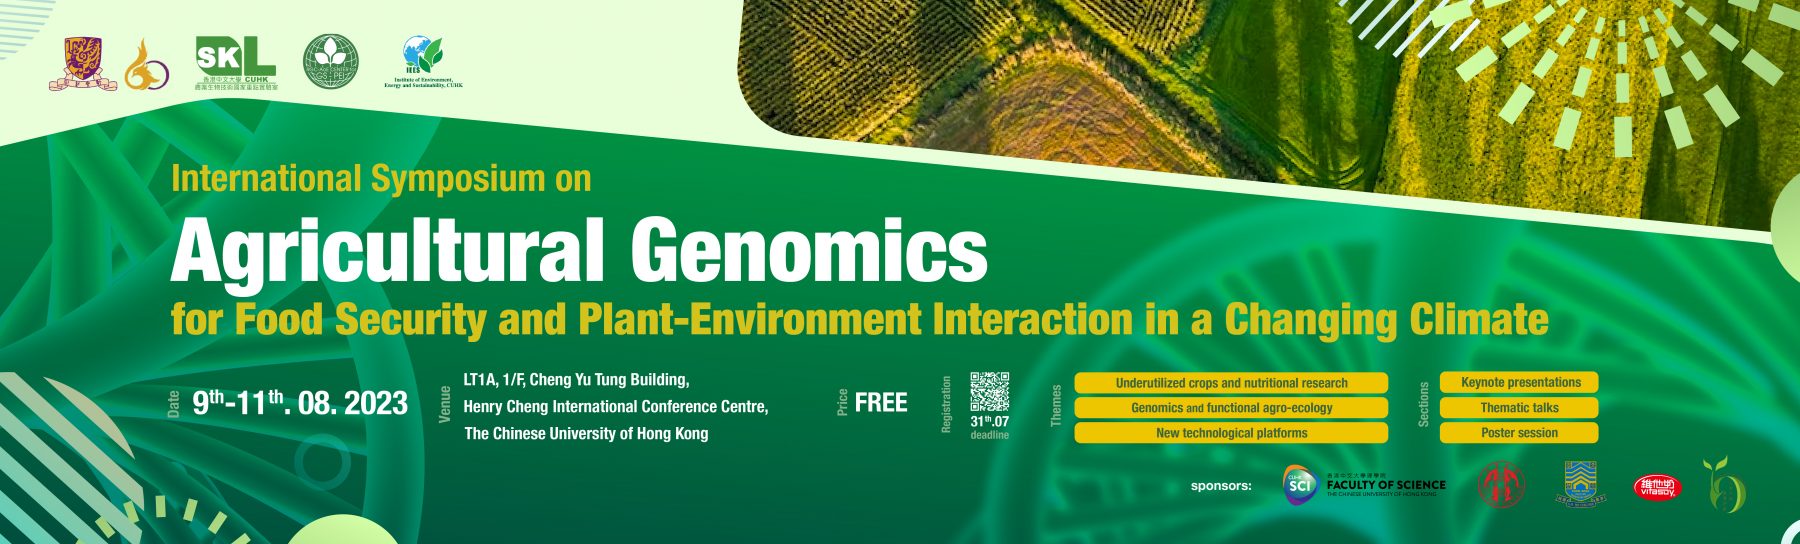 International Symposium on Agricultural Genomics for Food Security and Plant-Environment Interaction in a Changing Climate